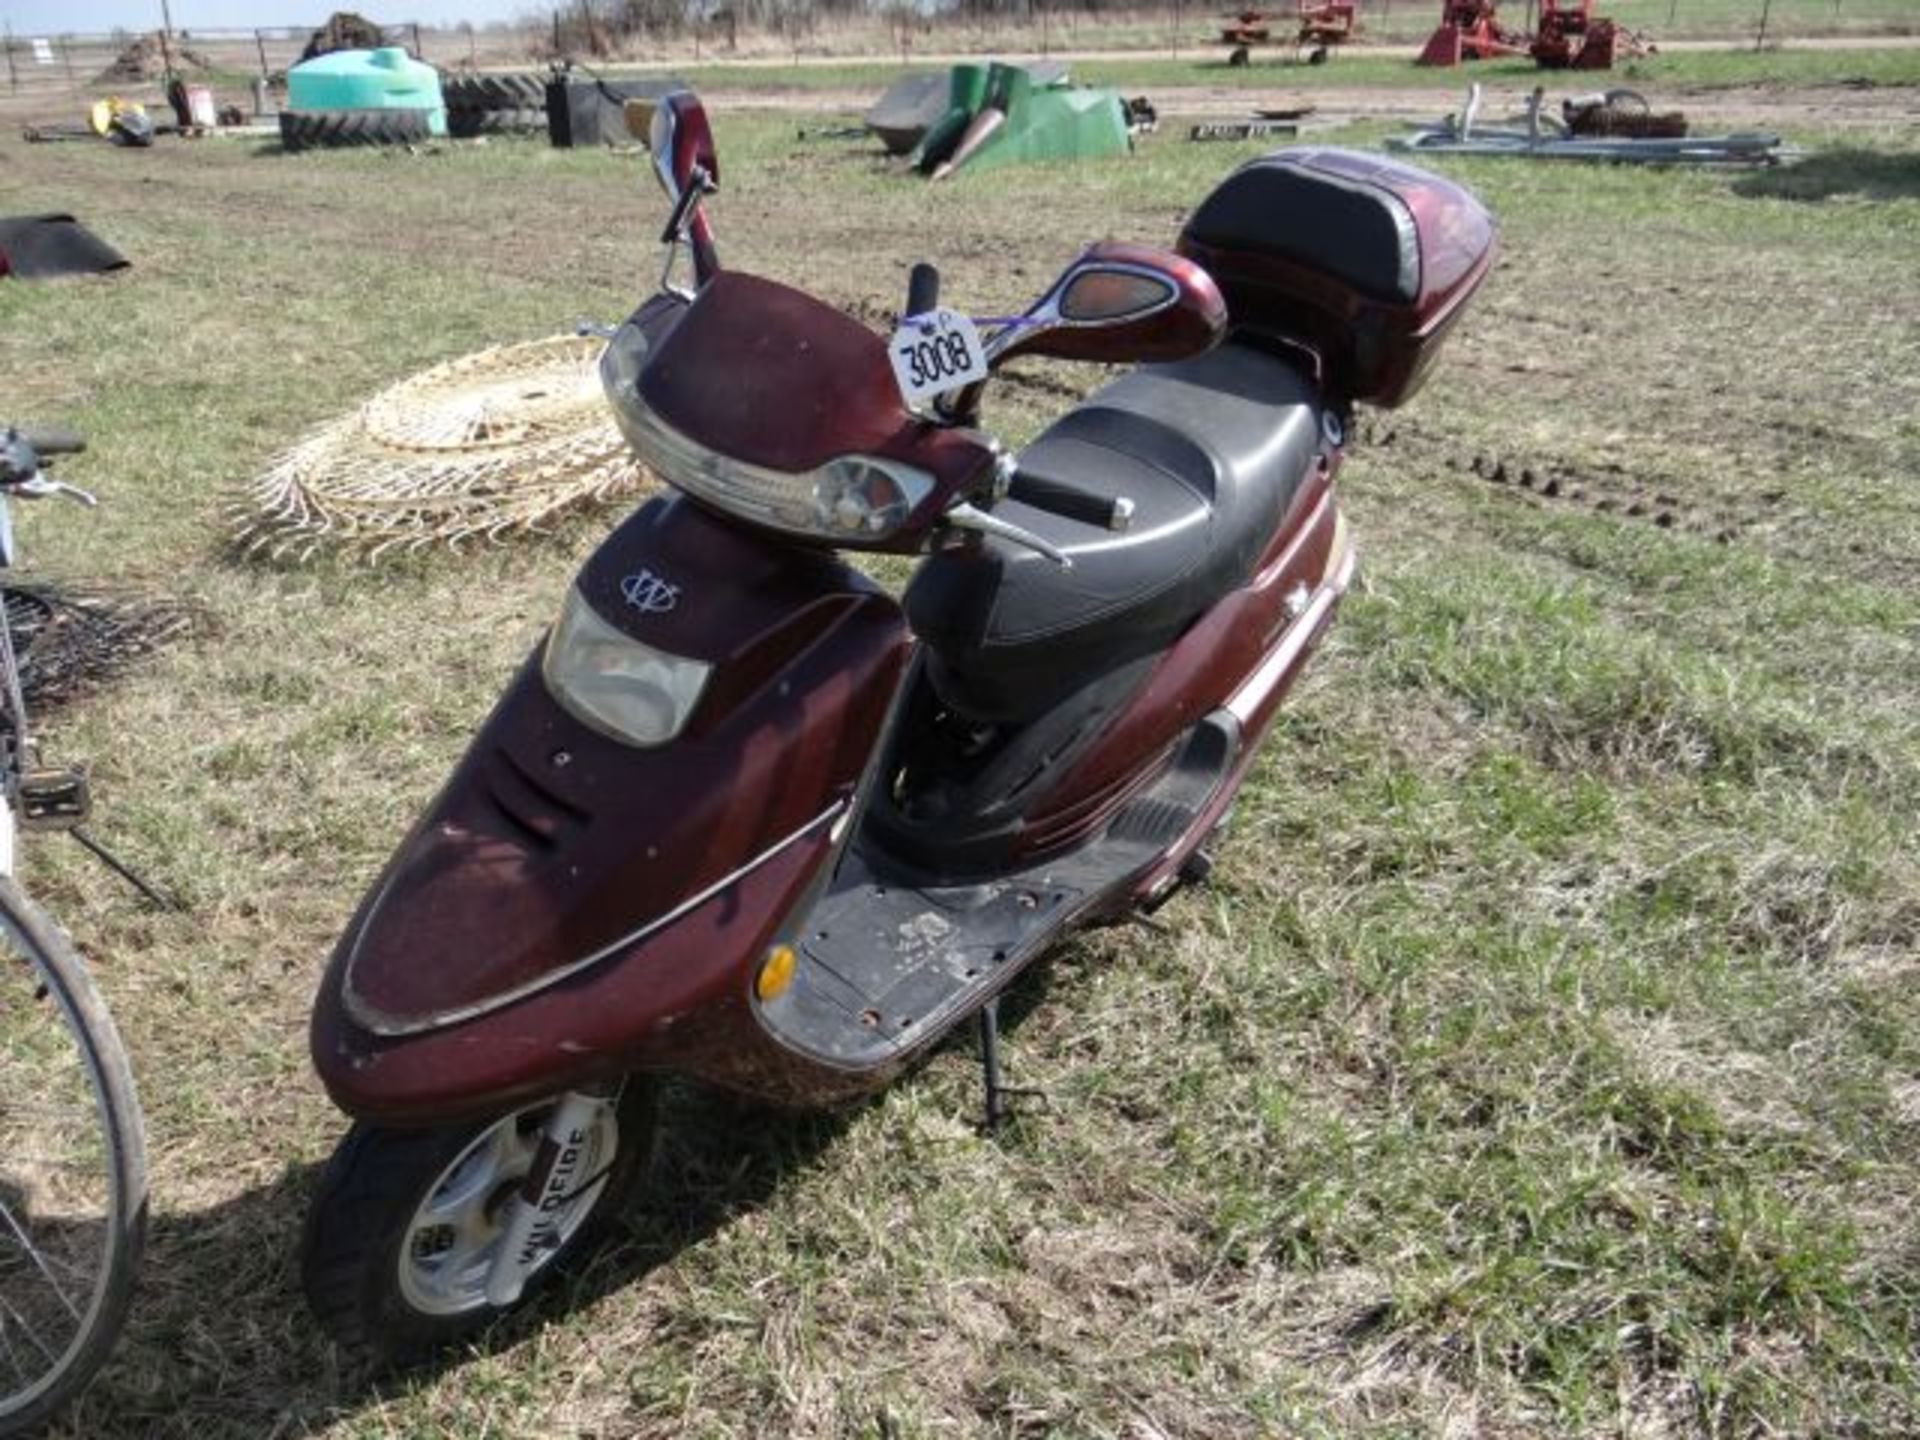 Lot 3008 Wildfire MoPed Not Running, No Title - Image 2 of 4